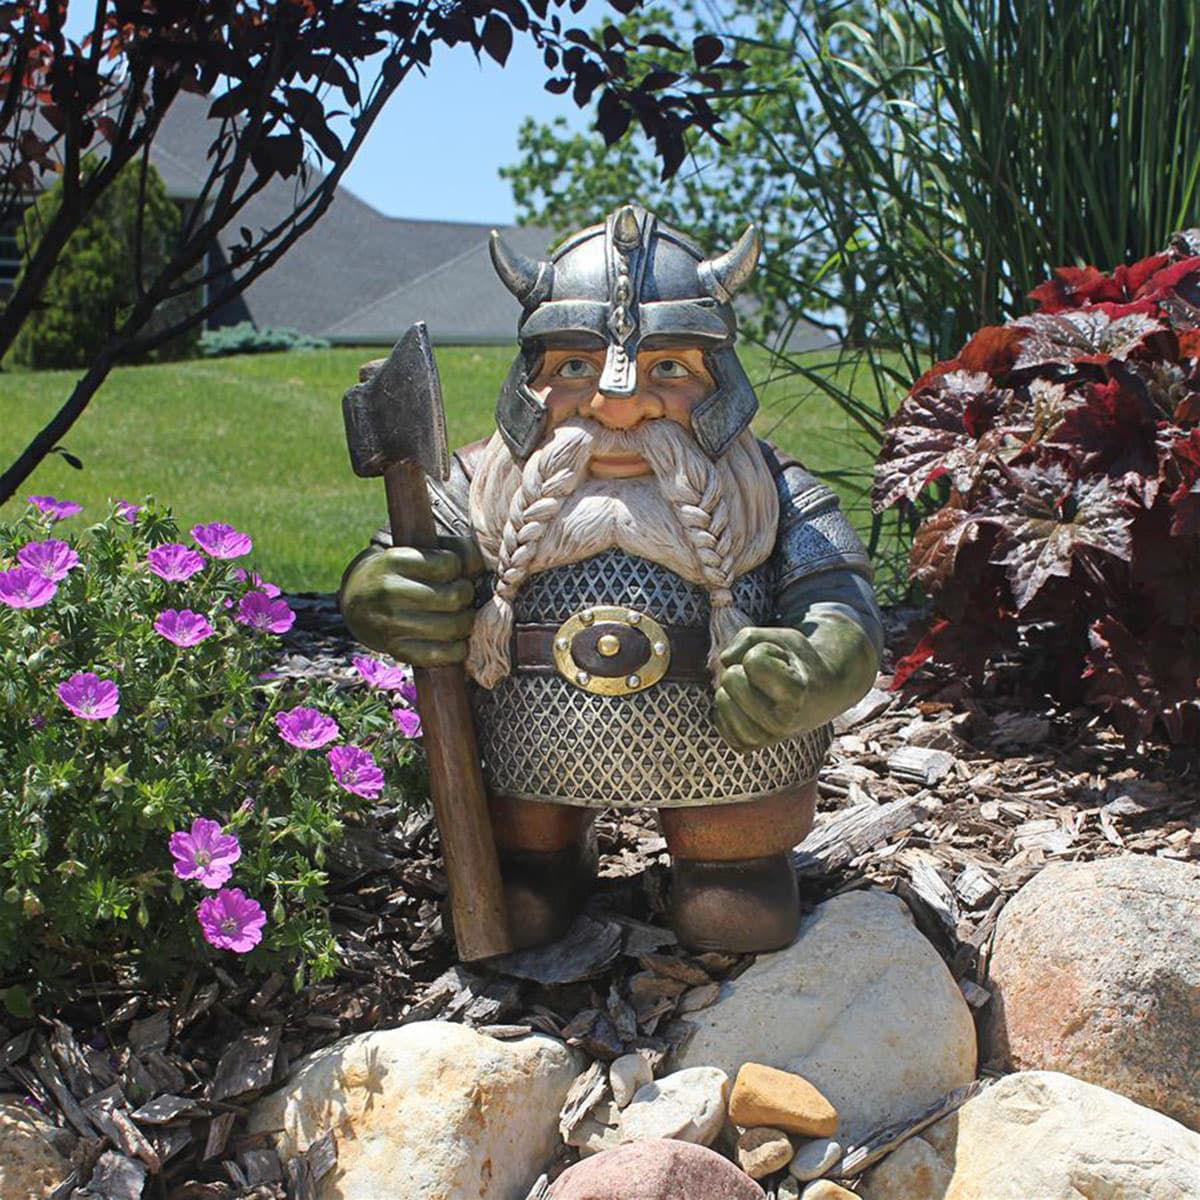 Viking Garden Gnome is hand painted resin in hues so this dazzling dwarf can show off his horned helmet and braided beard